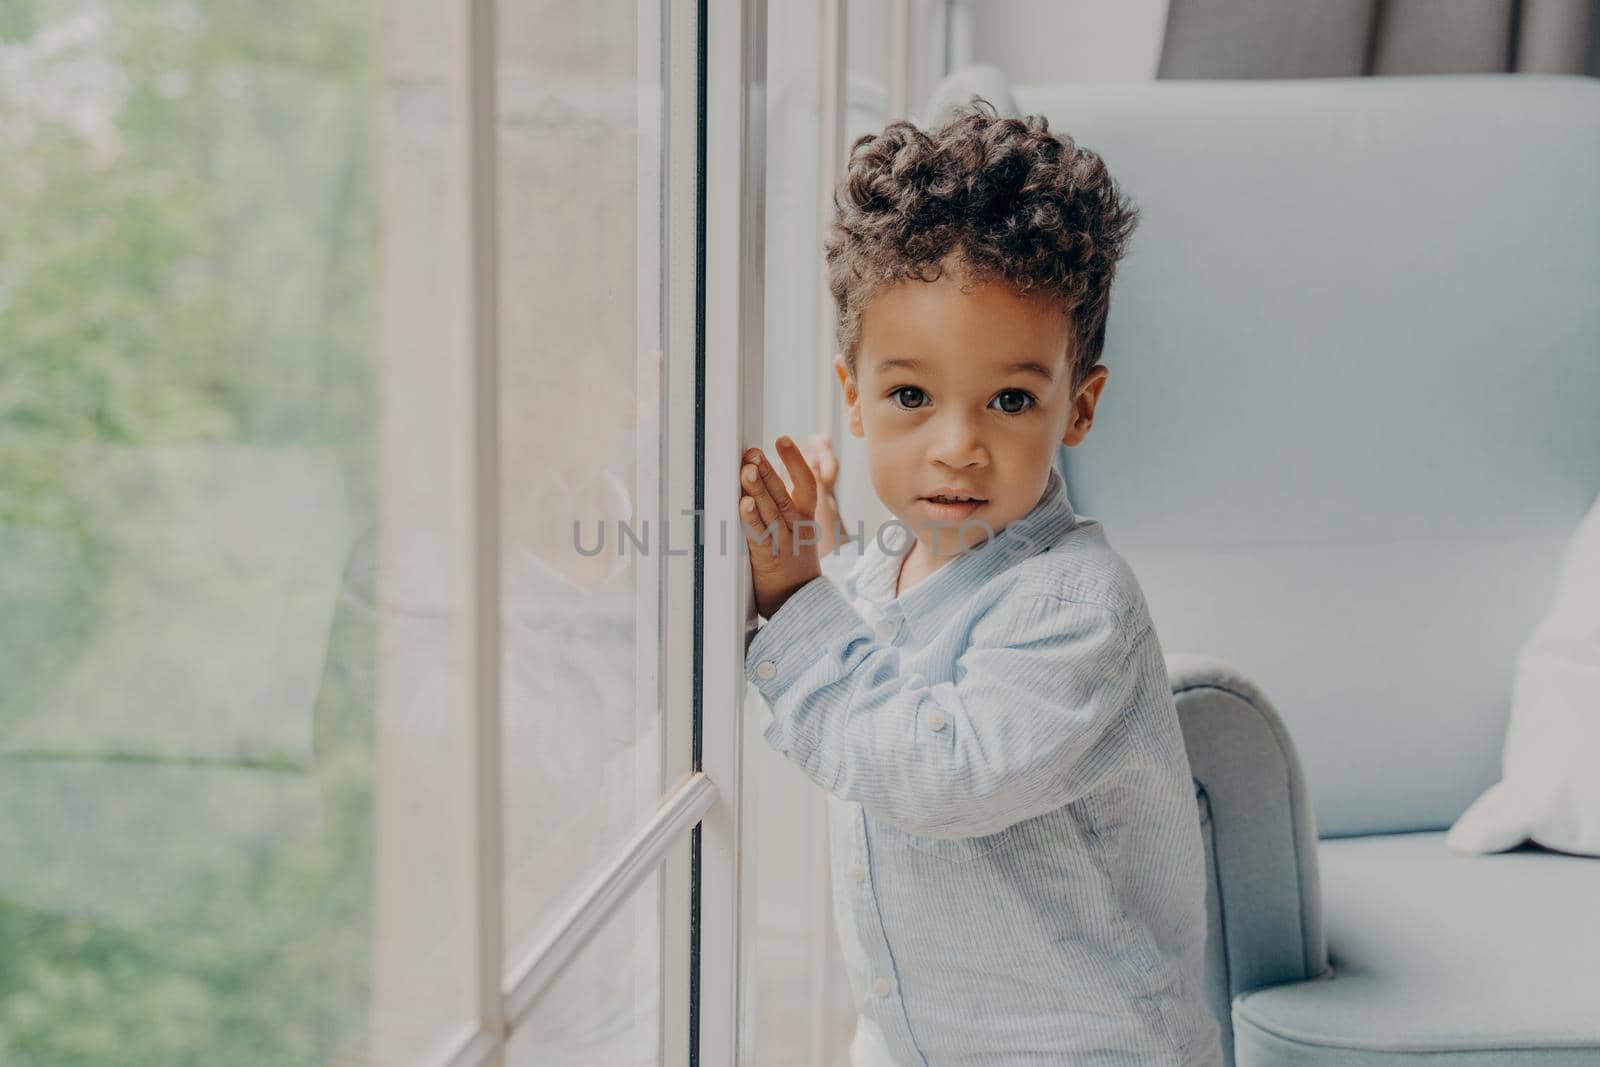 Portrait of adorable afro american curly haired baby boy in light blue colored shirt leaning on window glass in morning sunlight in living room at home while waiting for parents. Childhood concept